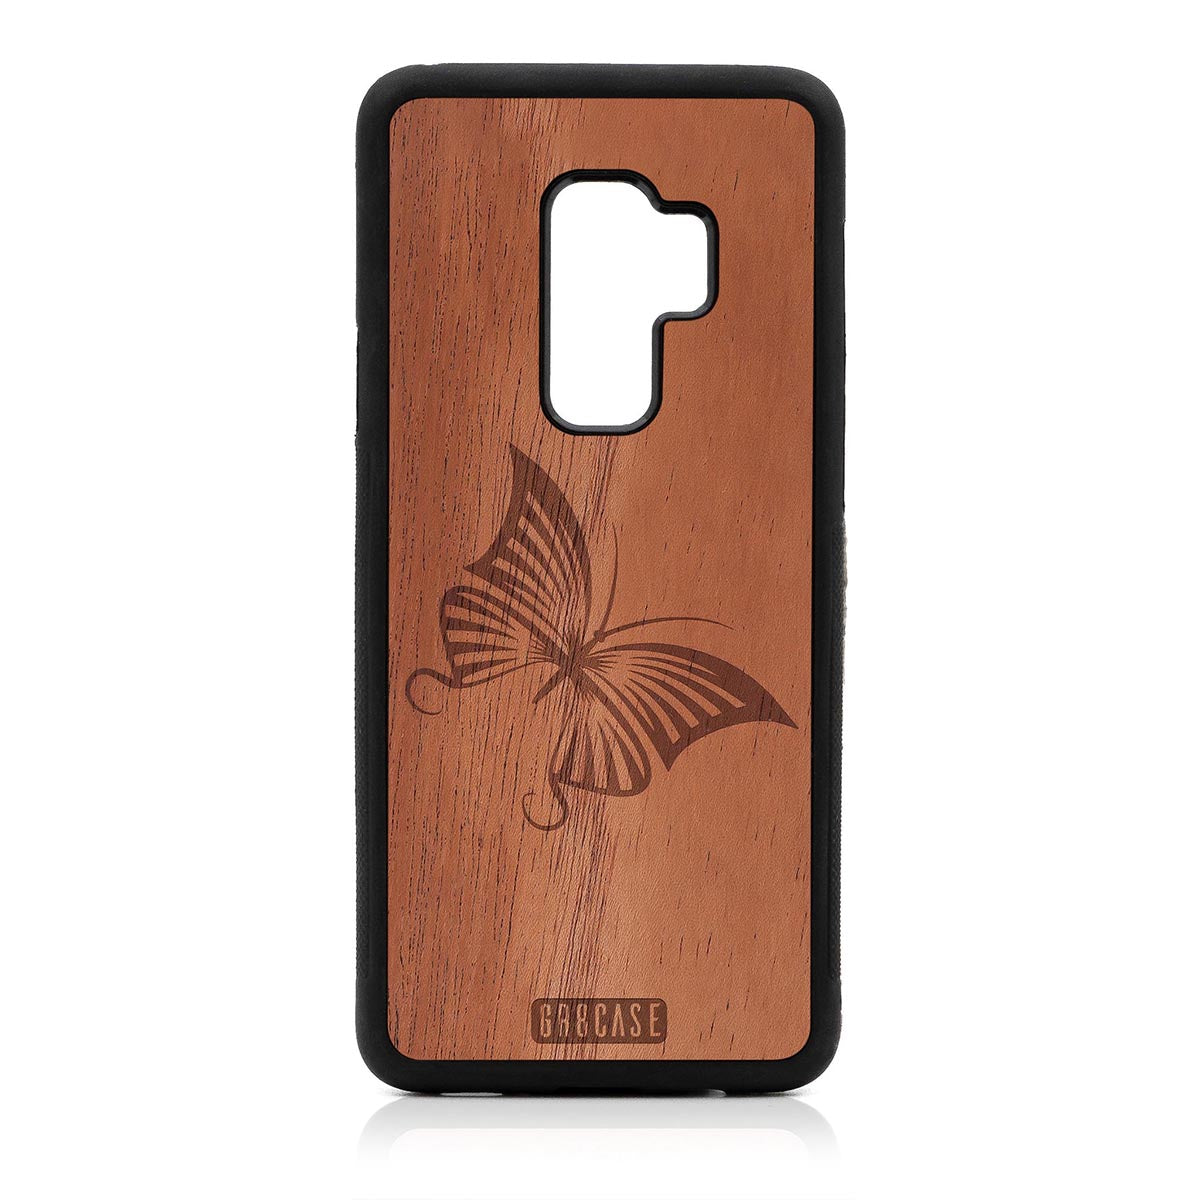 Butterfly Design Wood Case Samsung Galaxy S9 Plus by GR8CASE